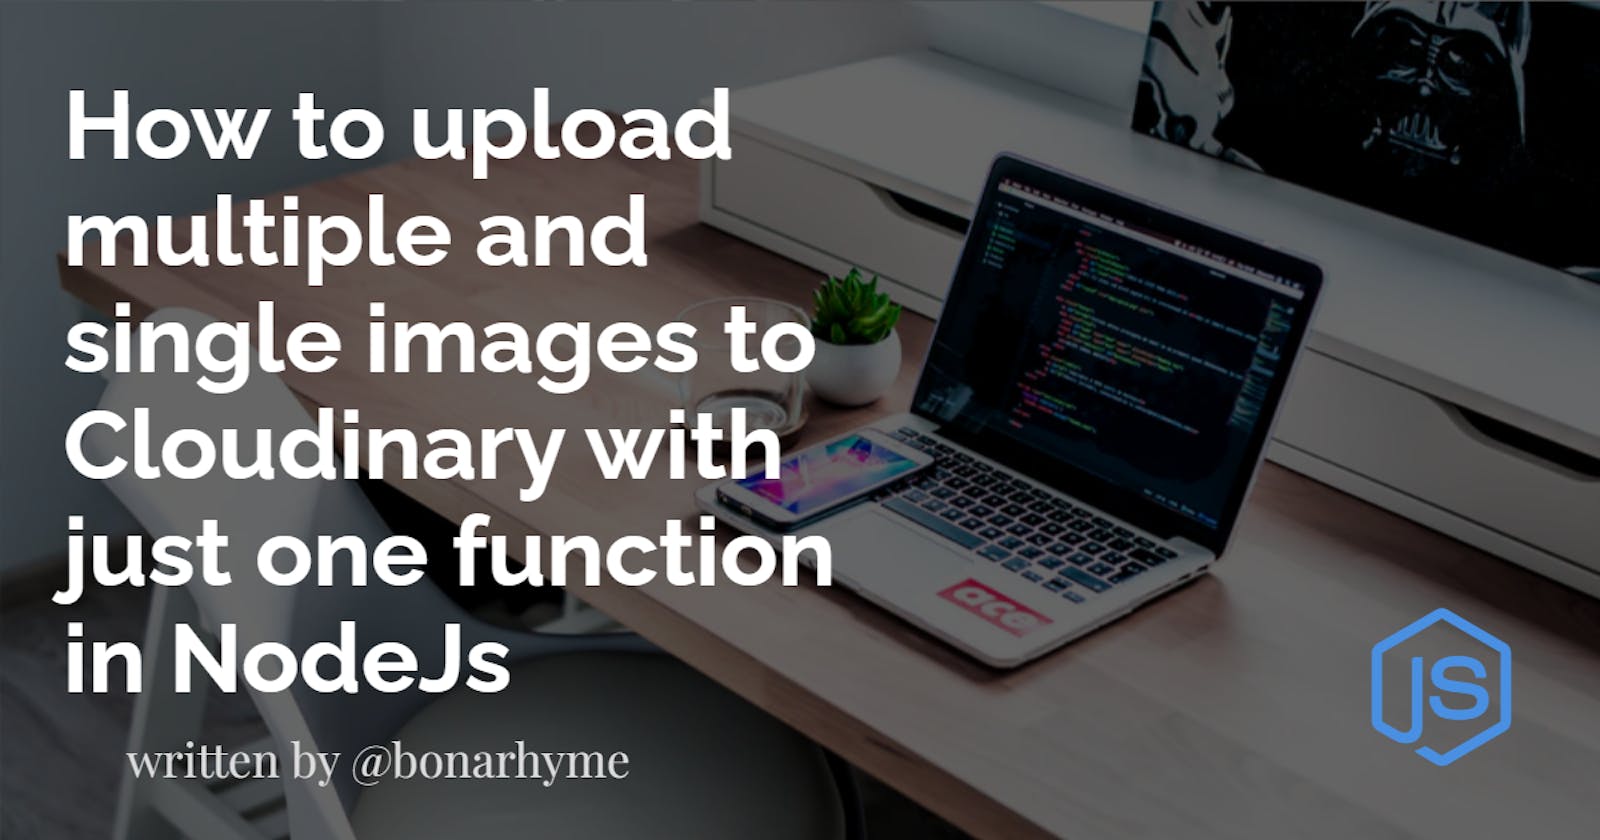 How to upload multiple and single images to Cloudinary with just one function in NodeJs